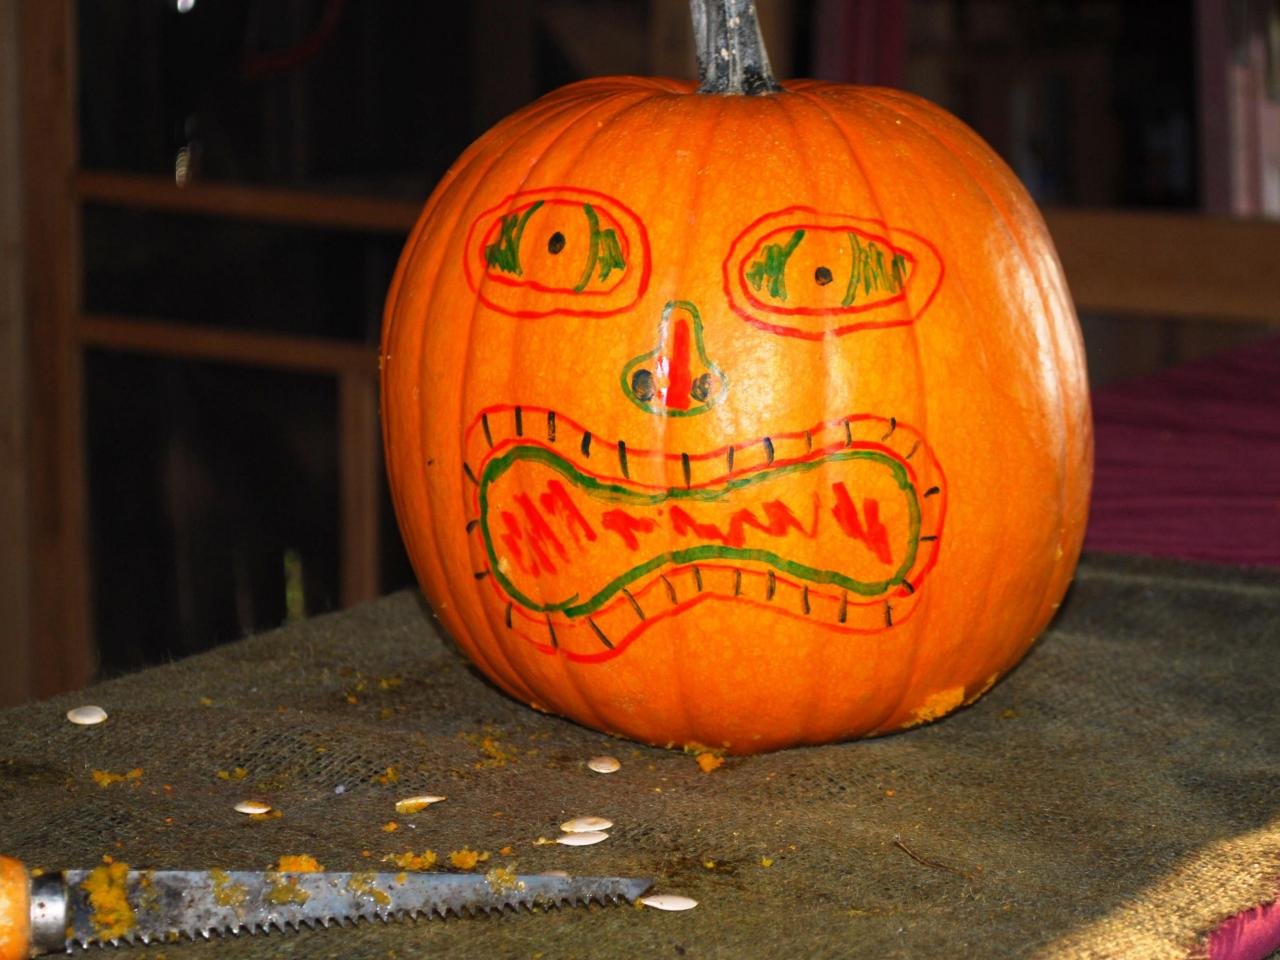 Which vegetable was originally used to carve jack-o-lanterns?